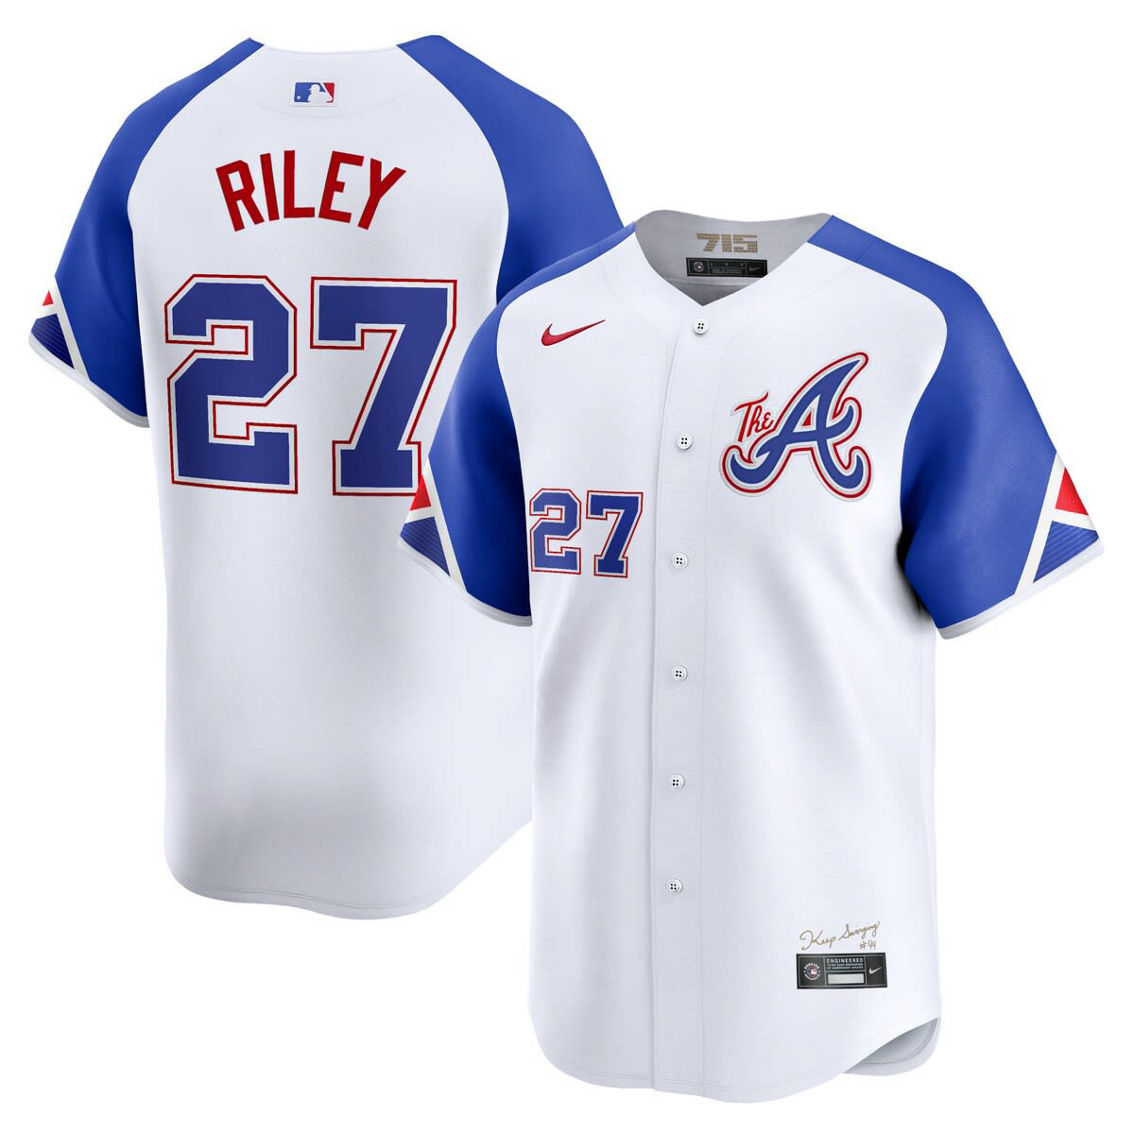 Nike Men's Austin Riley White Atlanta Braves City Connect Limited Player Jersey - Image 2 of 4